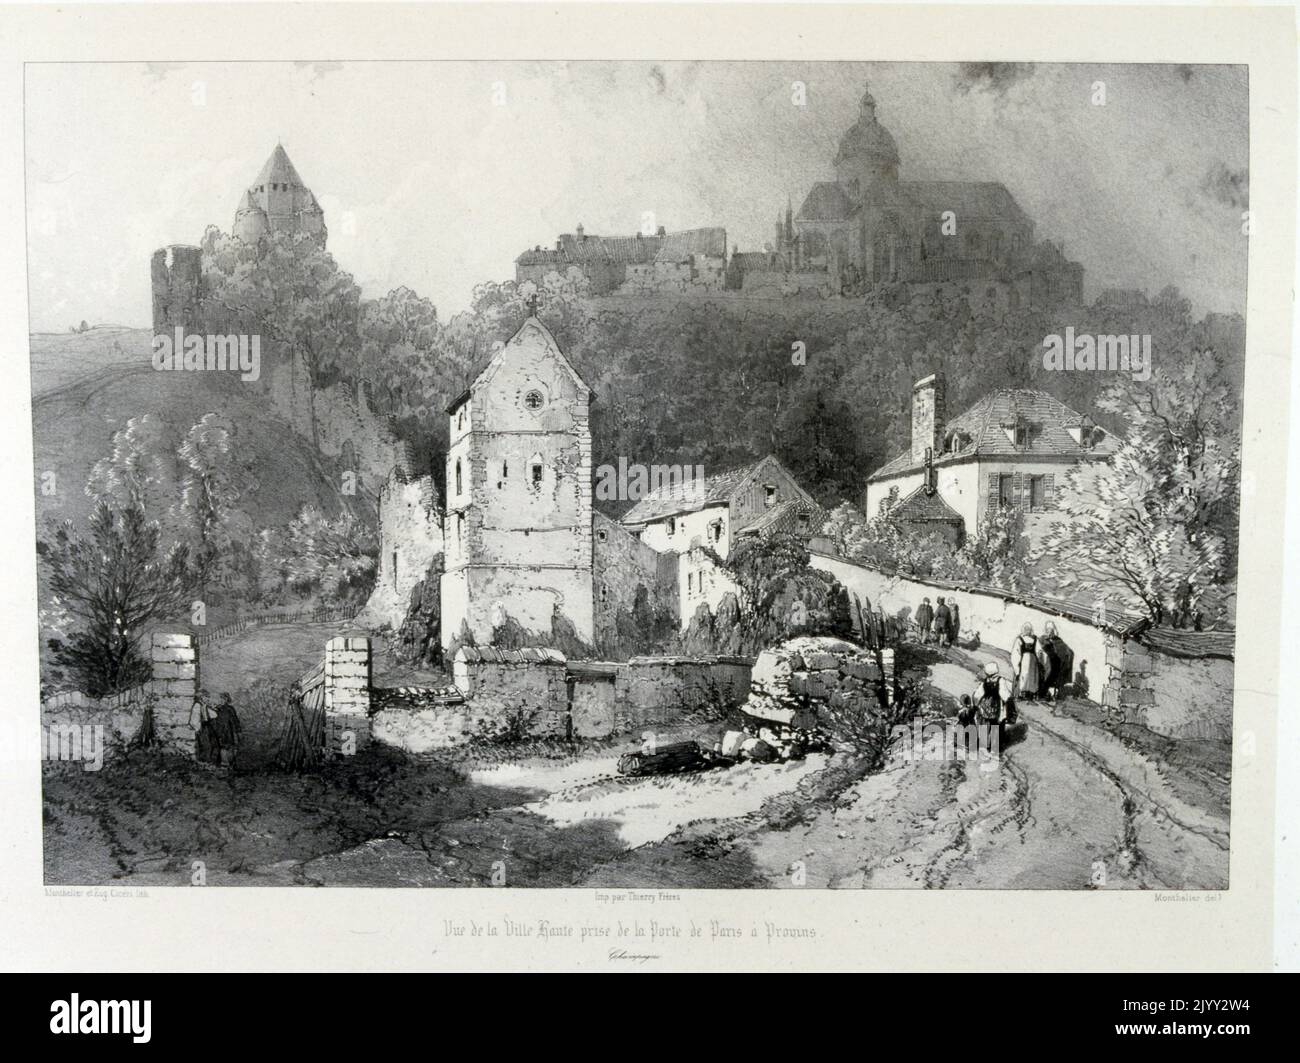 approach to the town of Provins, in north-central France near Paris. Its medieval architecture includes high ramparts with fortified gates. 19th century, 1857 Stock Photo